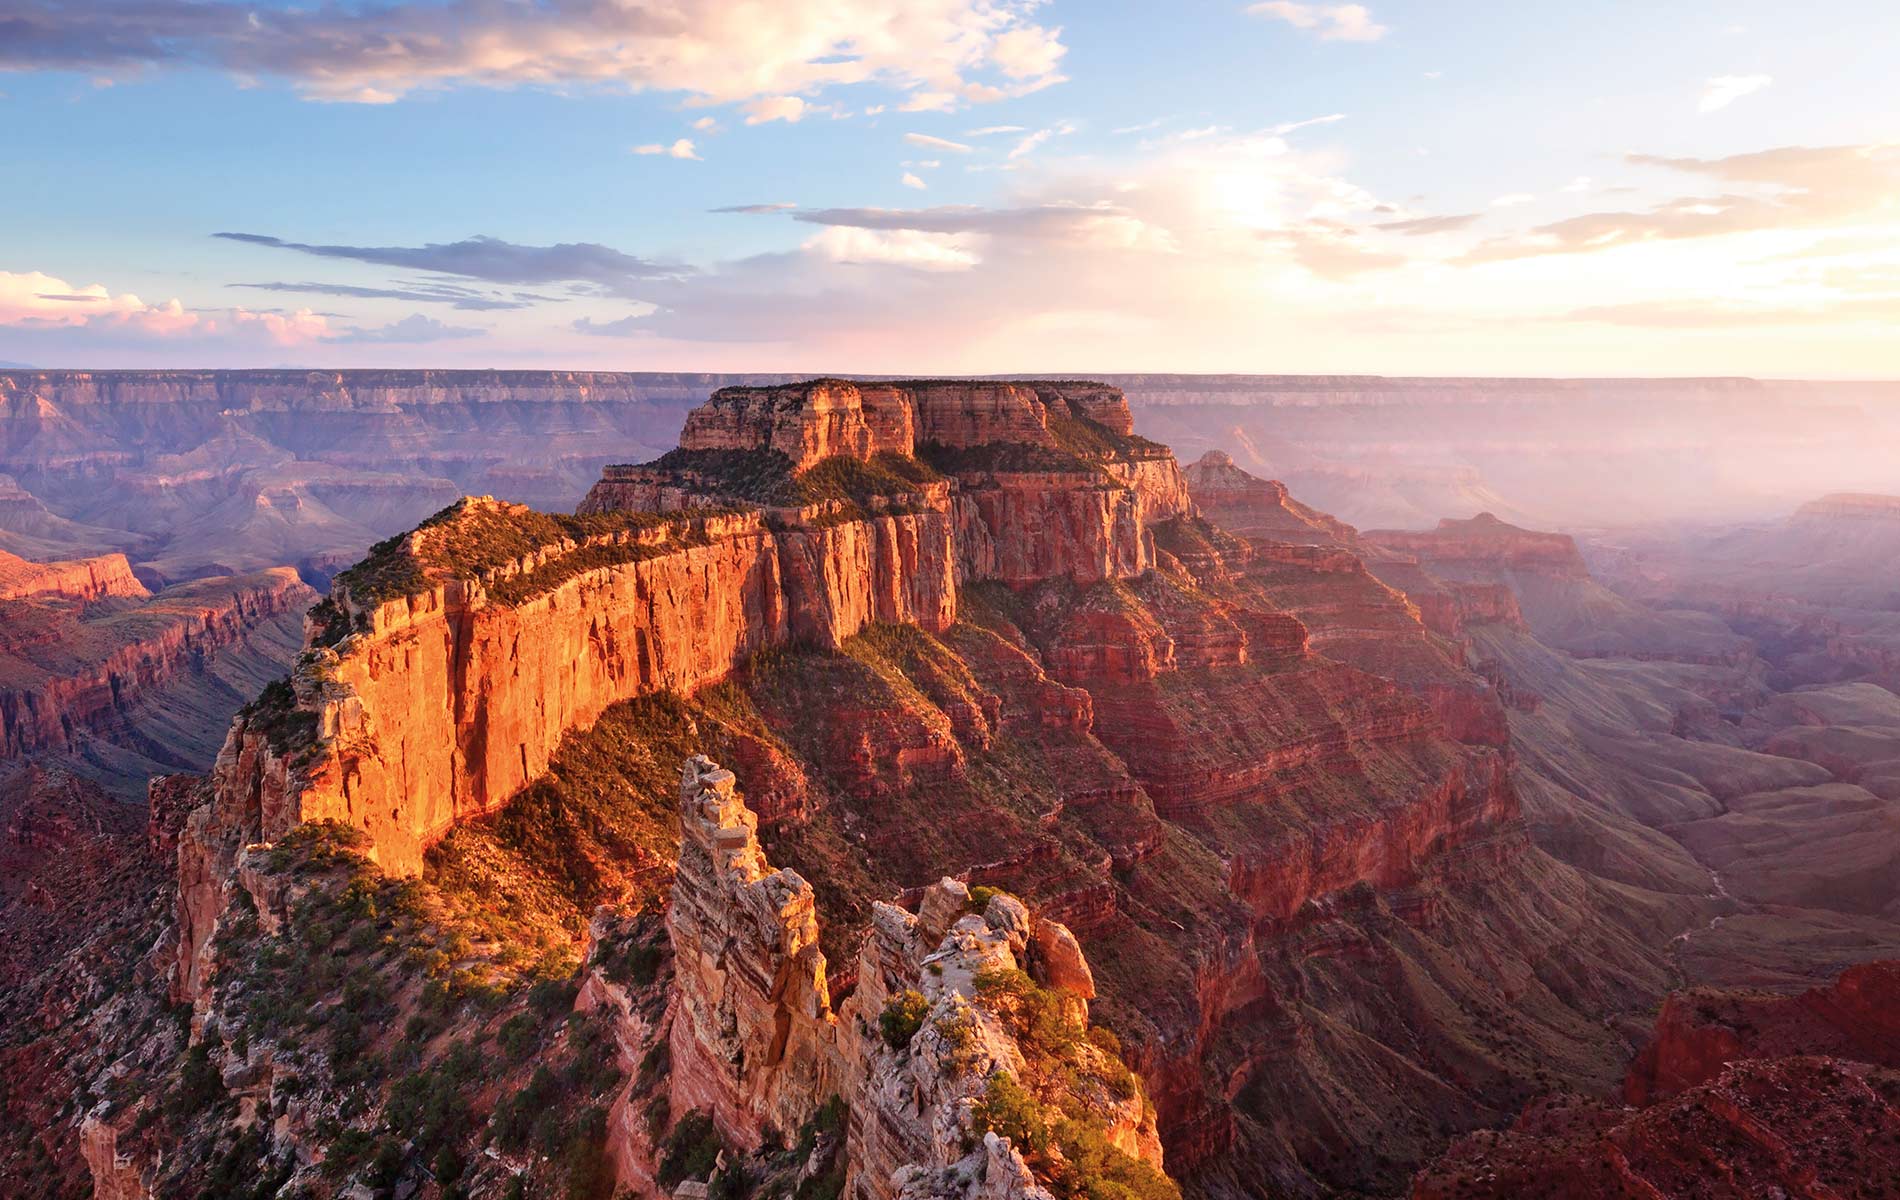 A beautiful Grand Canyon view from the Cape Royal Amphitheater during sunrise